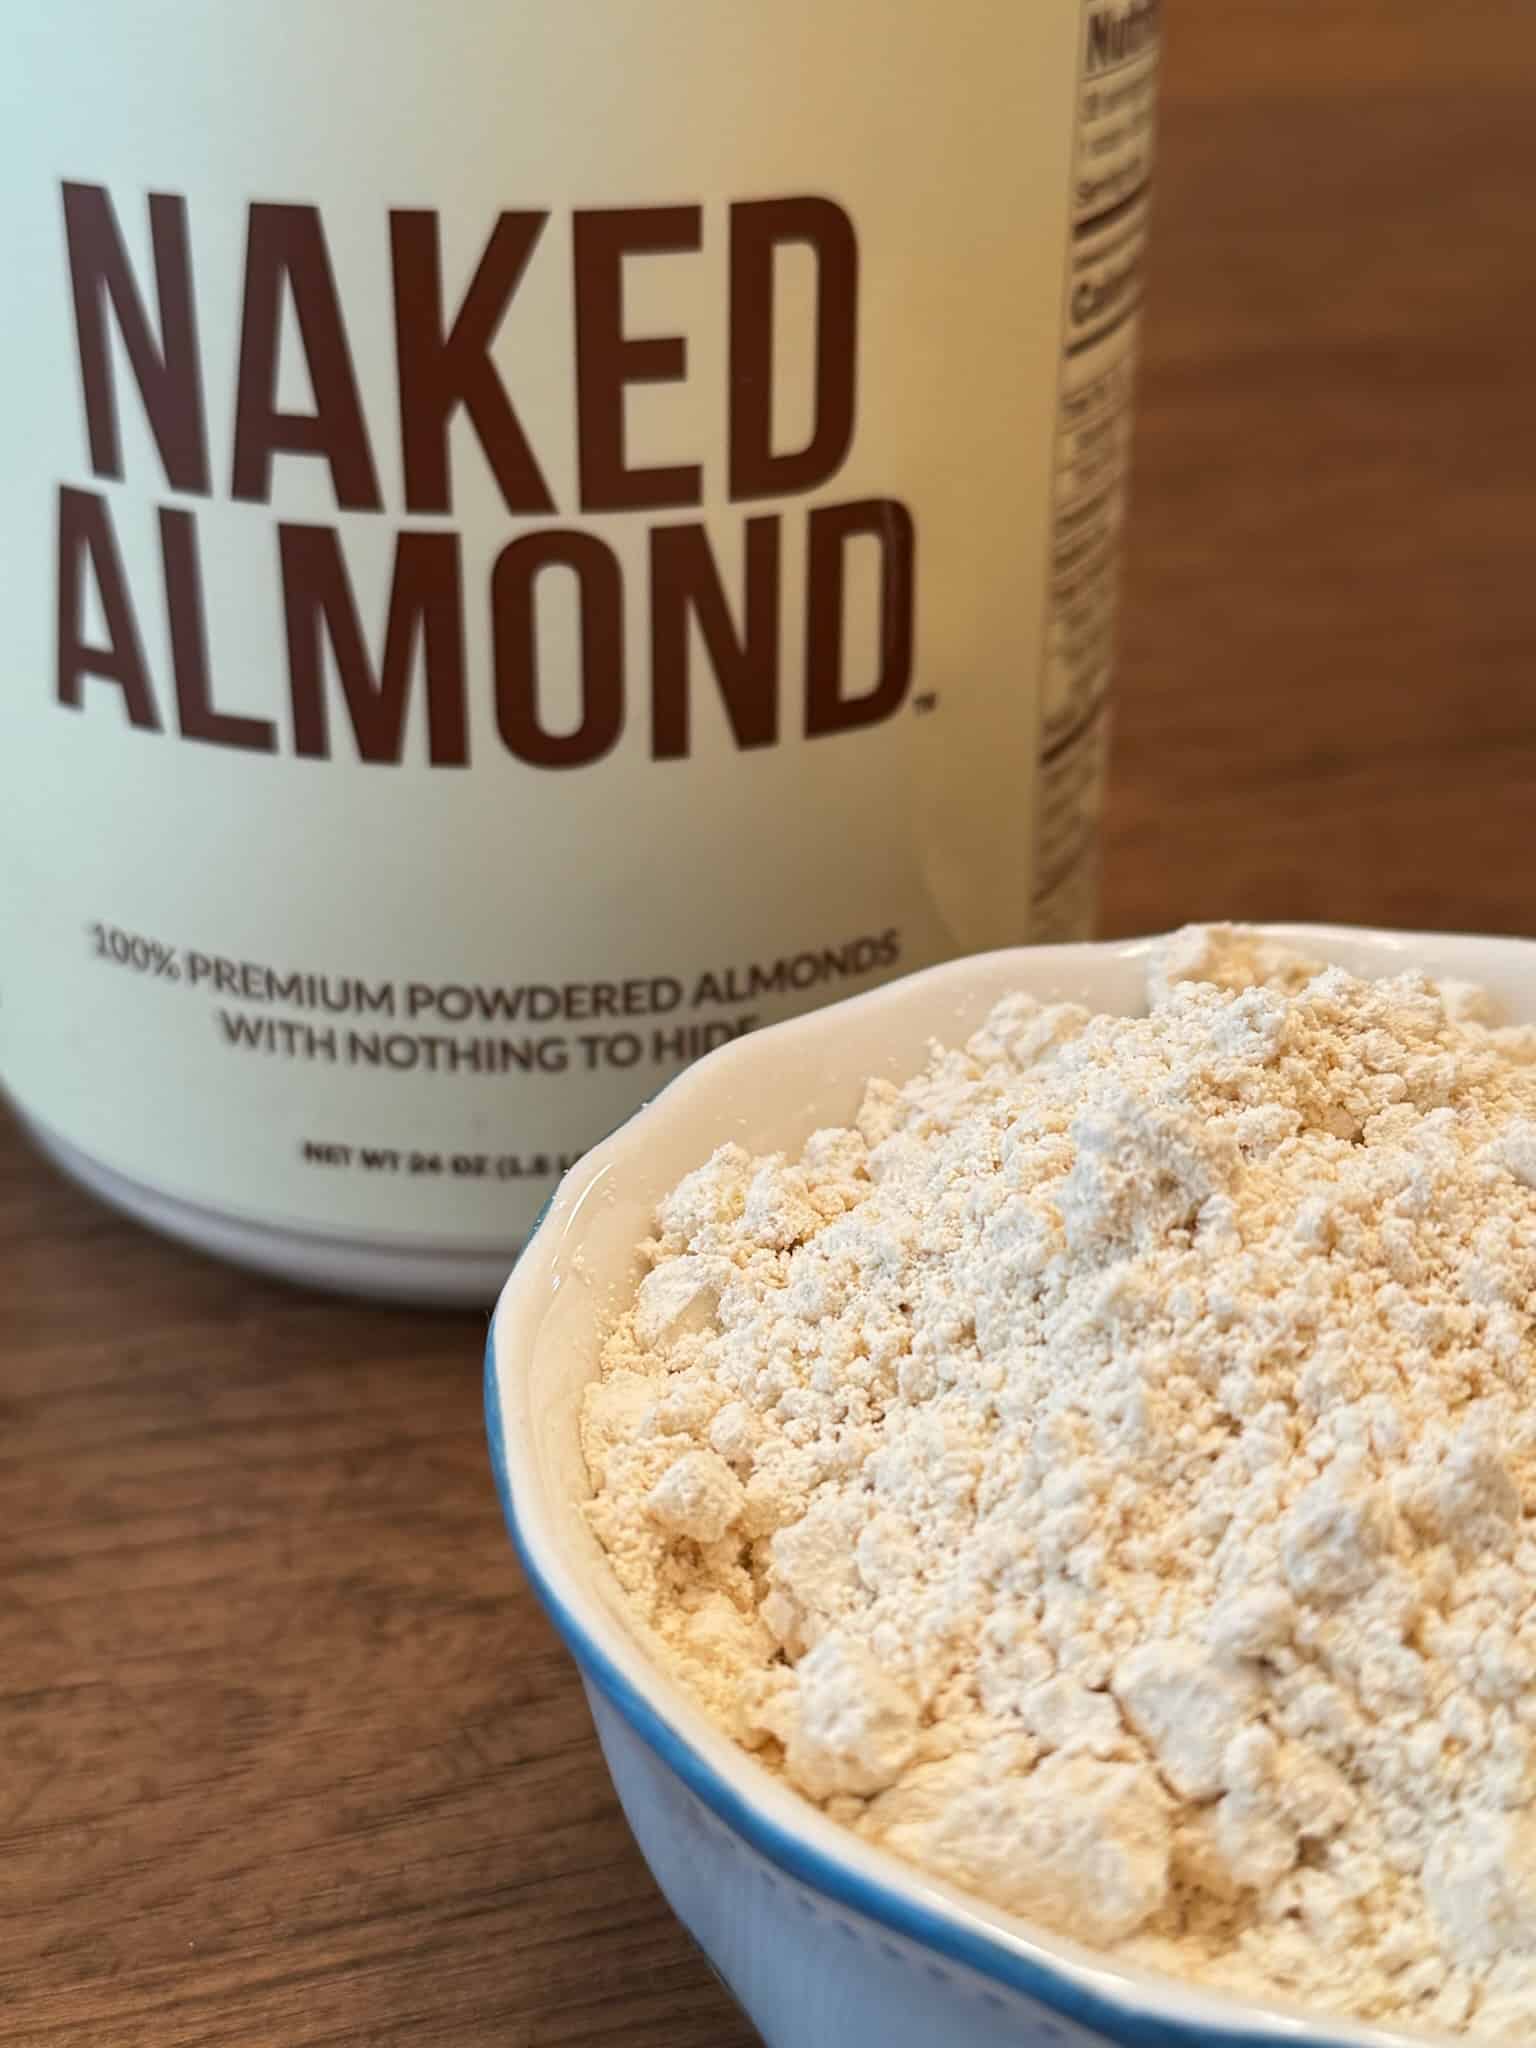 close up of naked almond powder container and in a small bowl